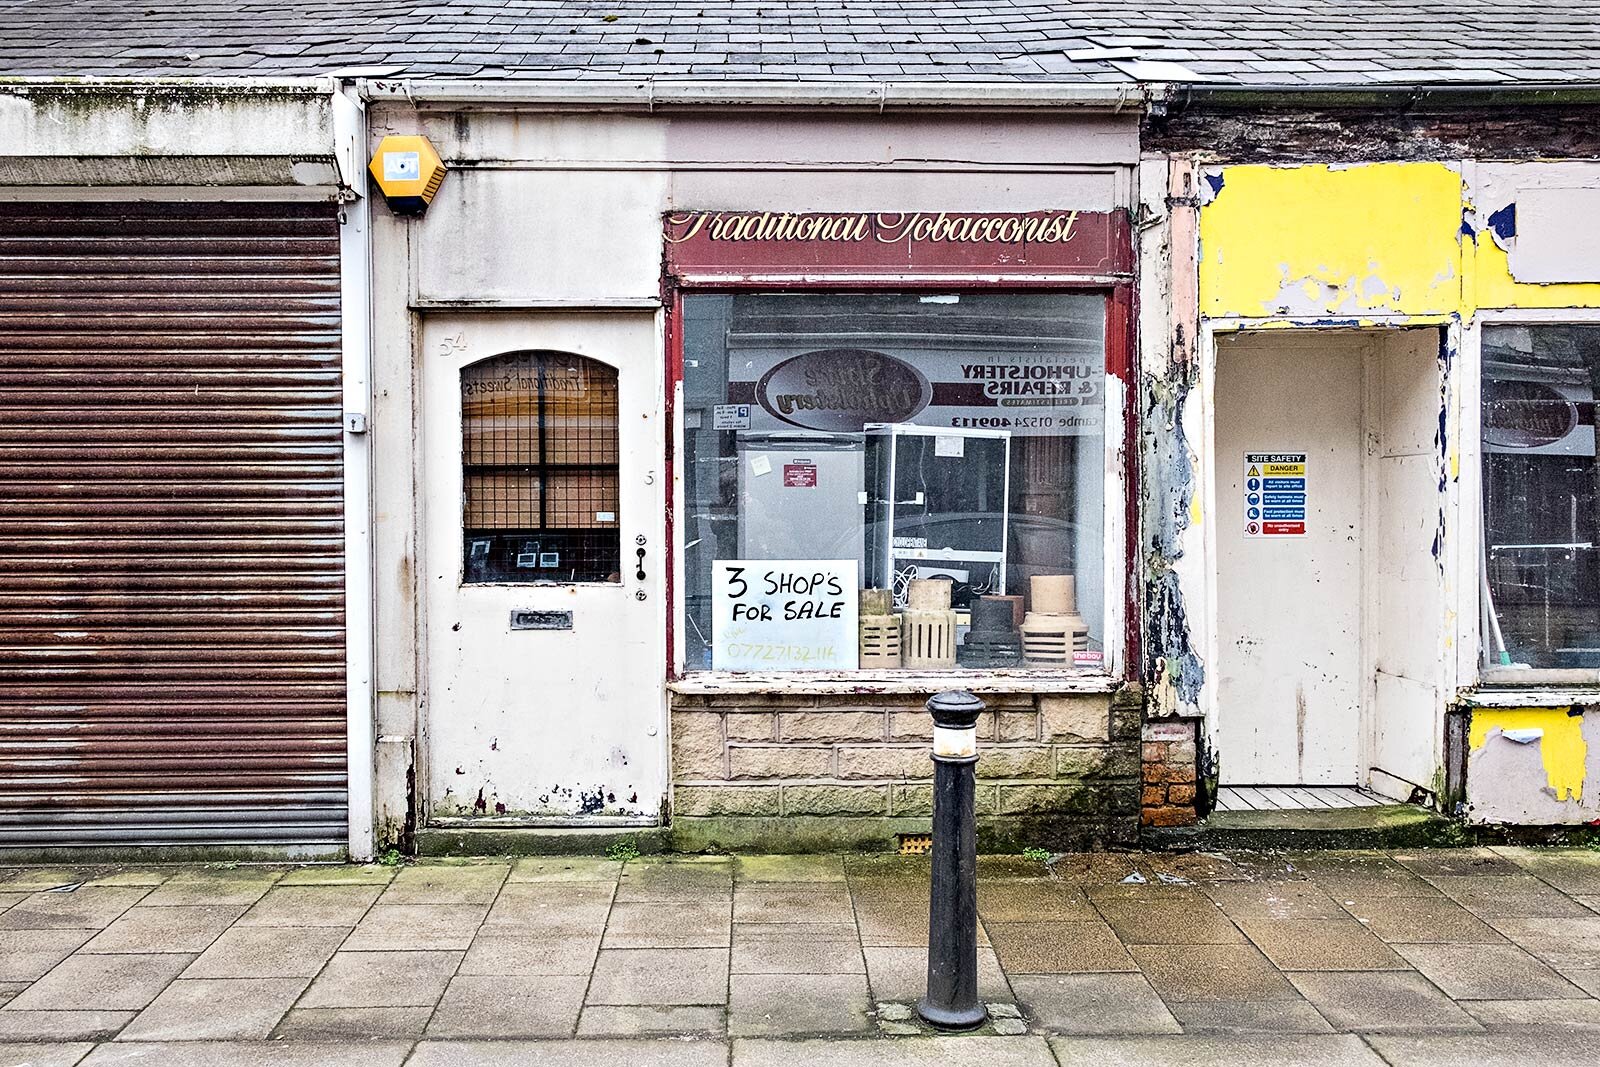 Traditional Tobacconist, 54 Yorkshire Street West, Morecambe, 2018 (25/50)